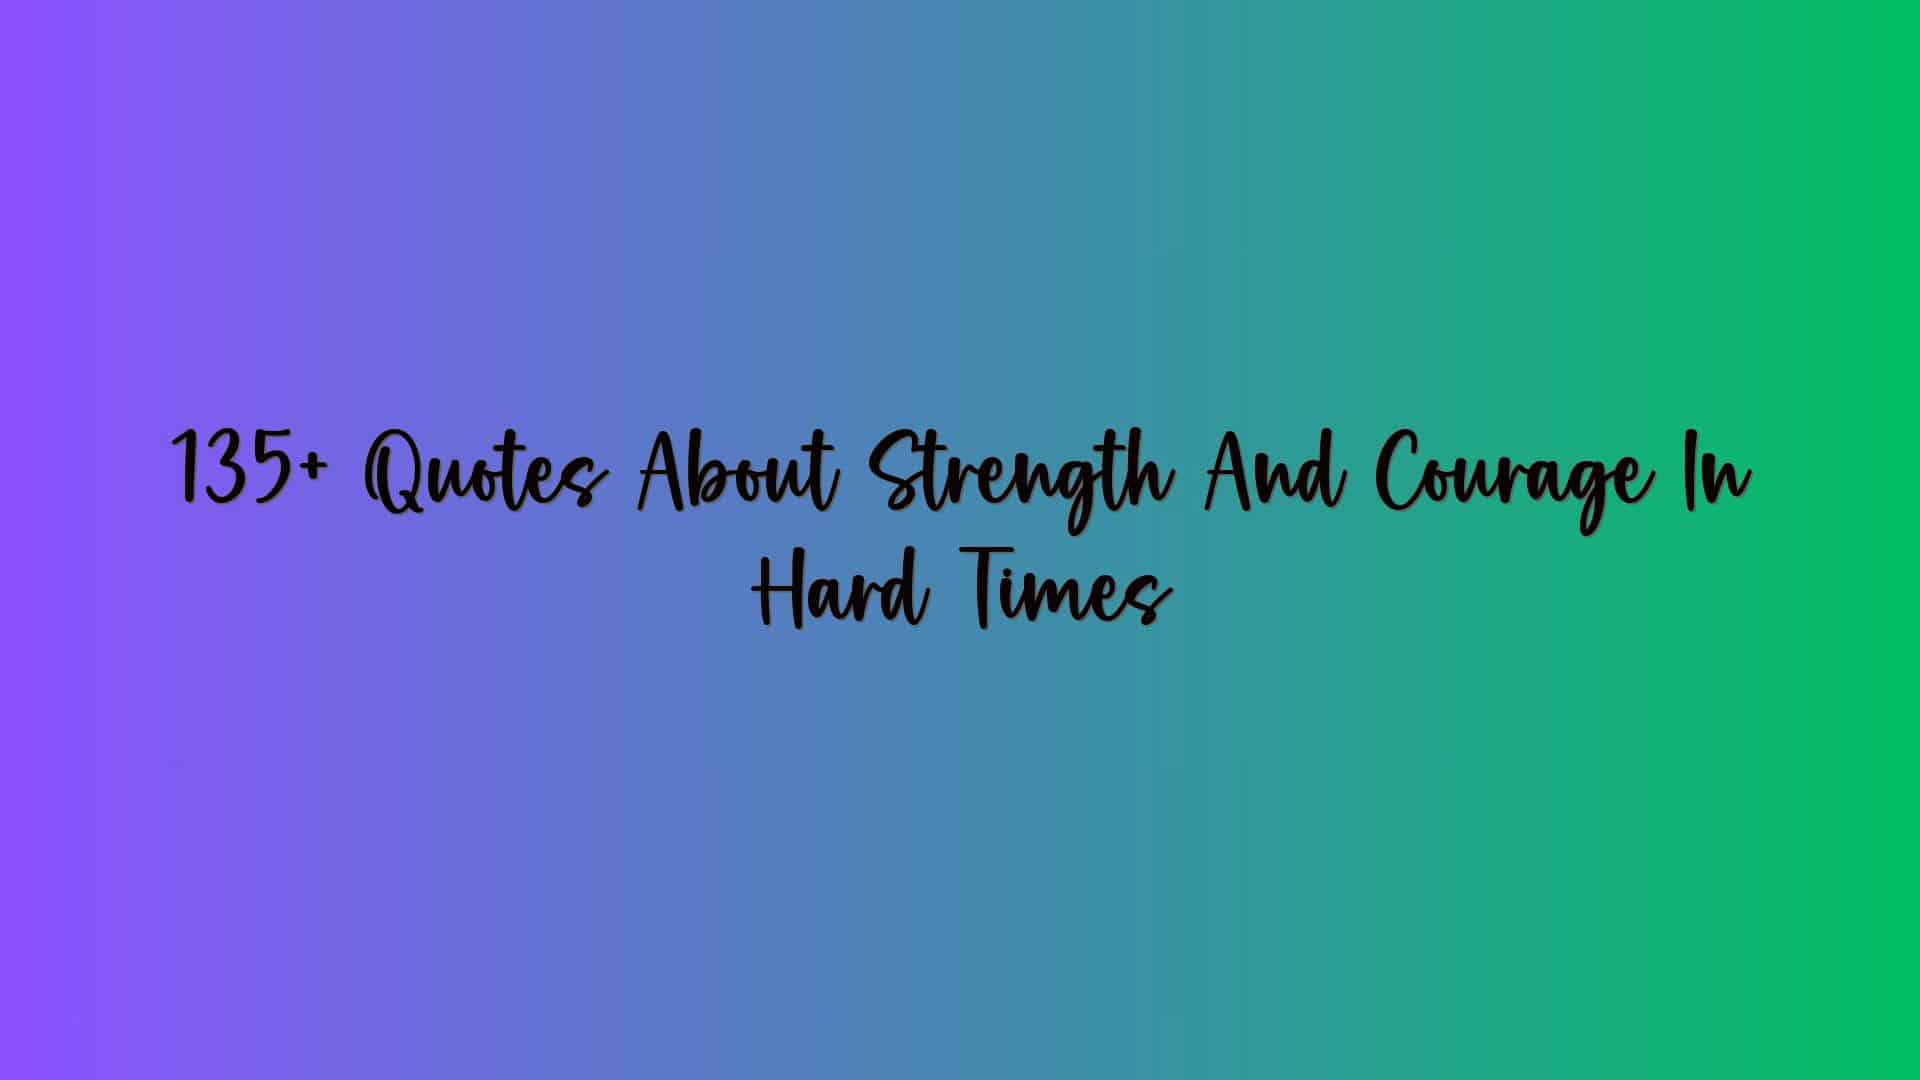 135+ Quotes About Strength And Courage In Hard Times